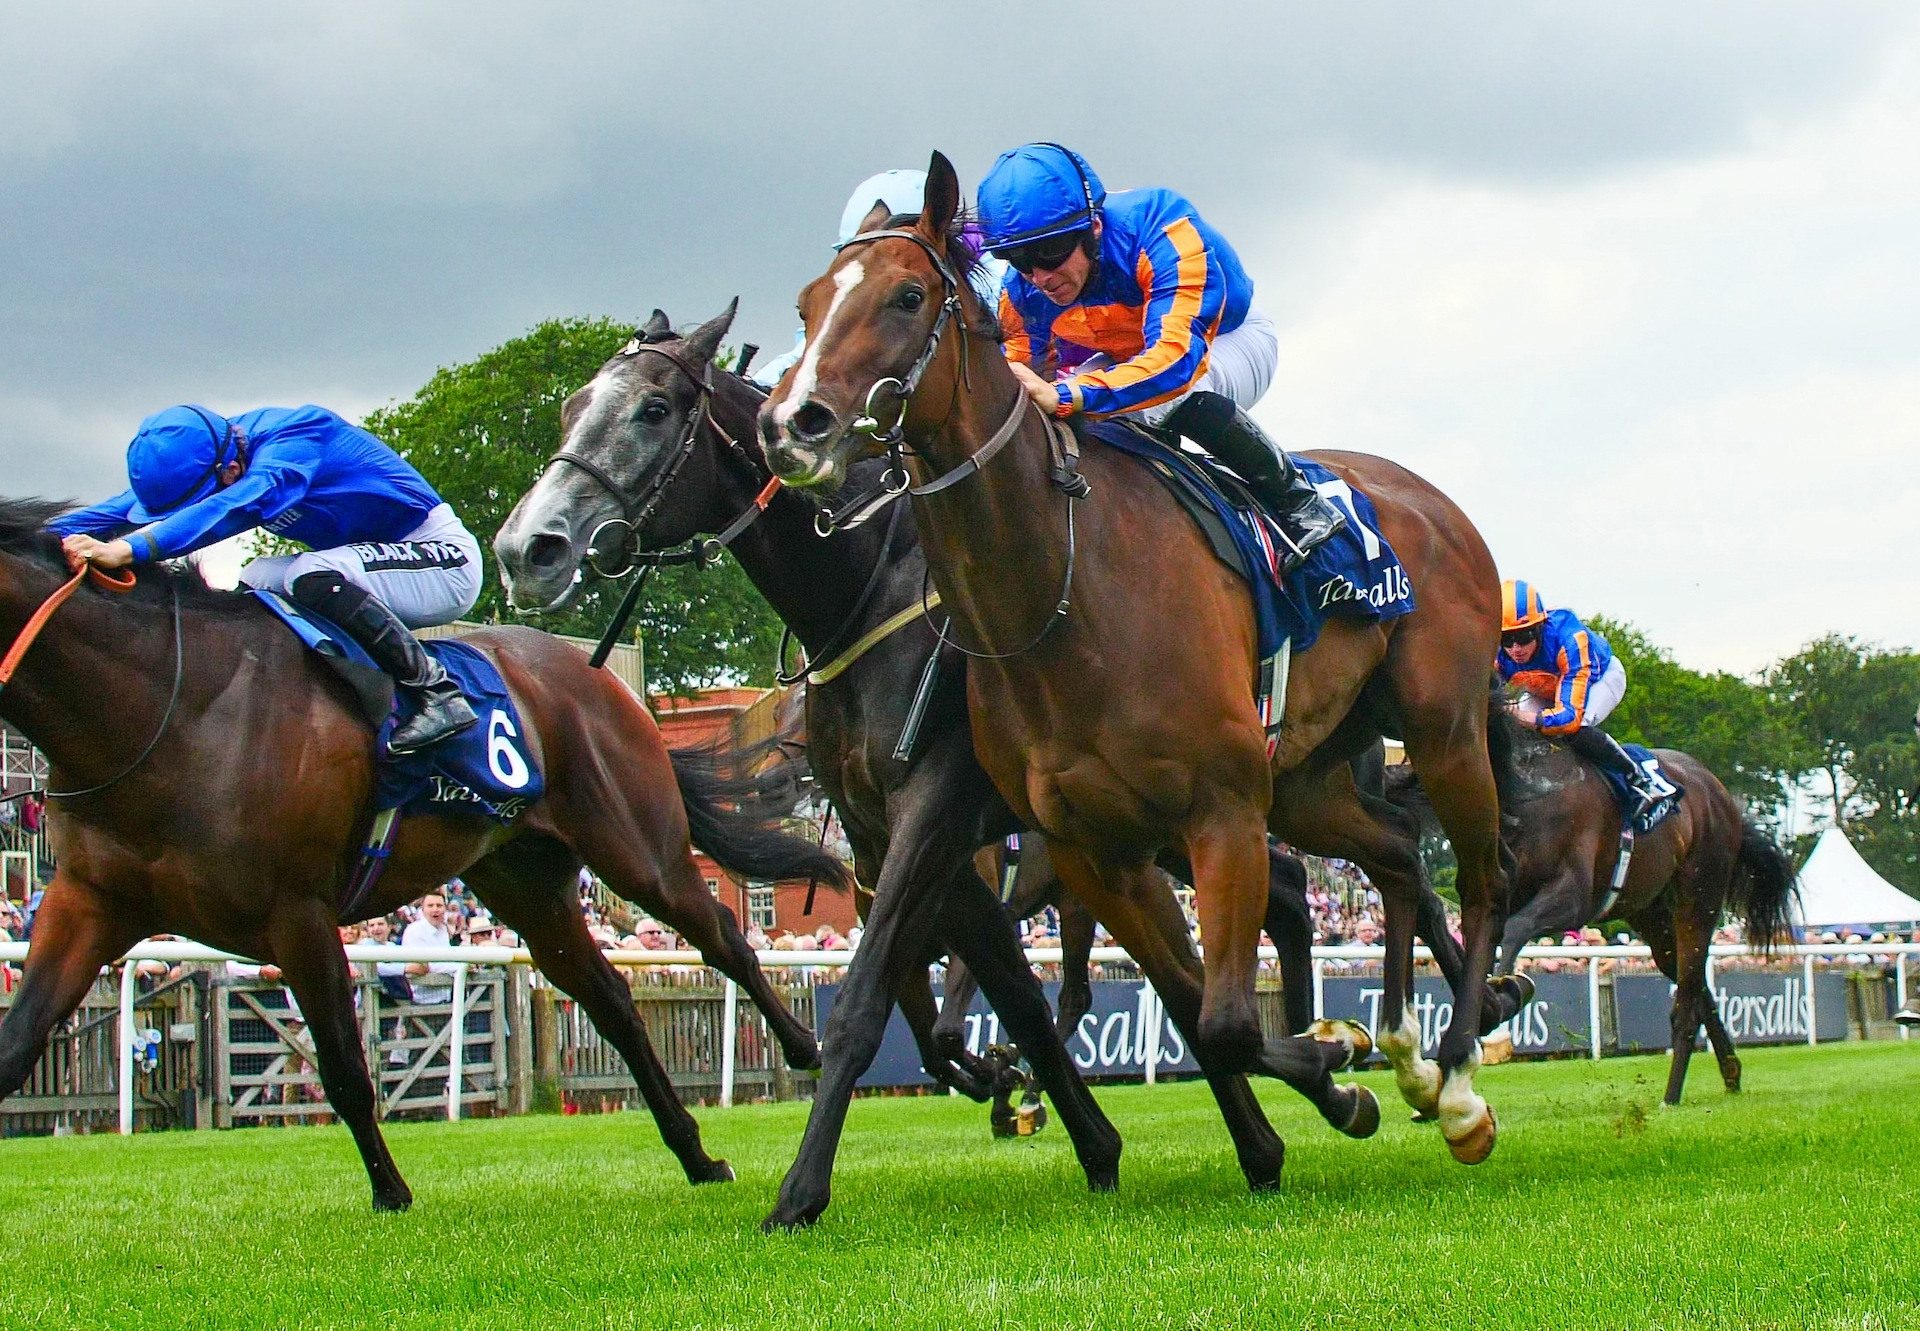 Royal Lytham (Gleneagles) Wins Gr.2 The July Stakes at Newmarket